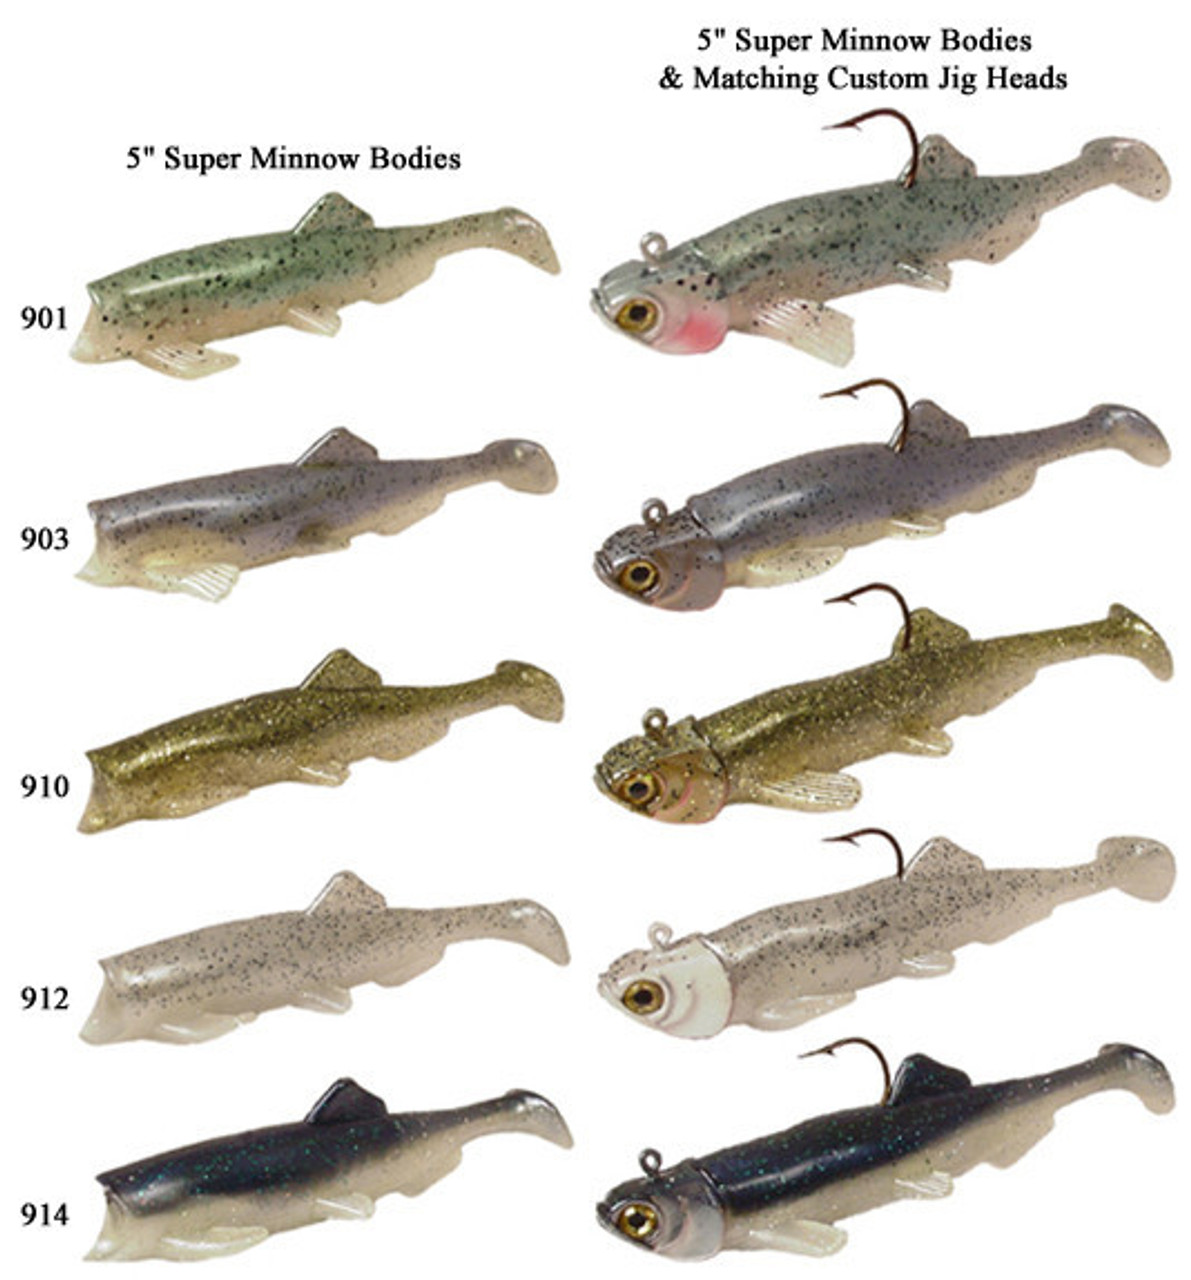 swimming minnow lure, swimming minnow lure Suppliers and